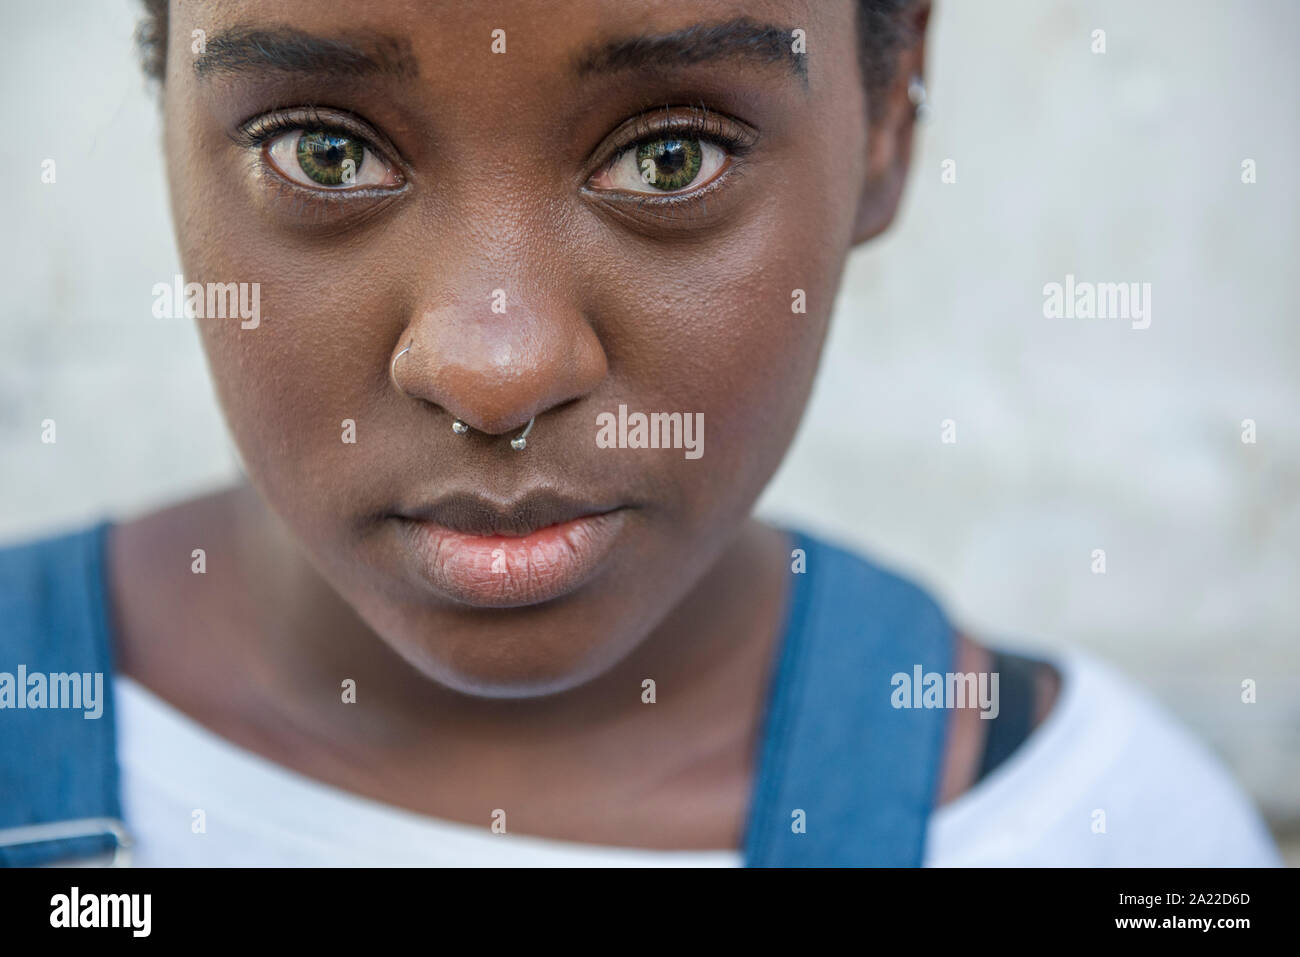 Afro-Brazilian girl with green eyes wears jumpsuit Stock Photo